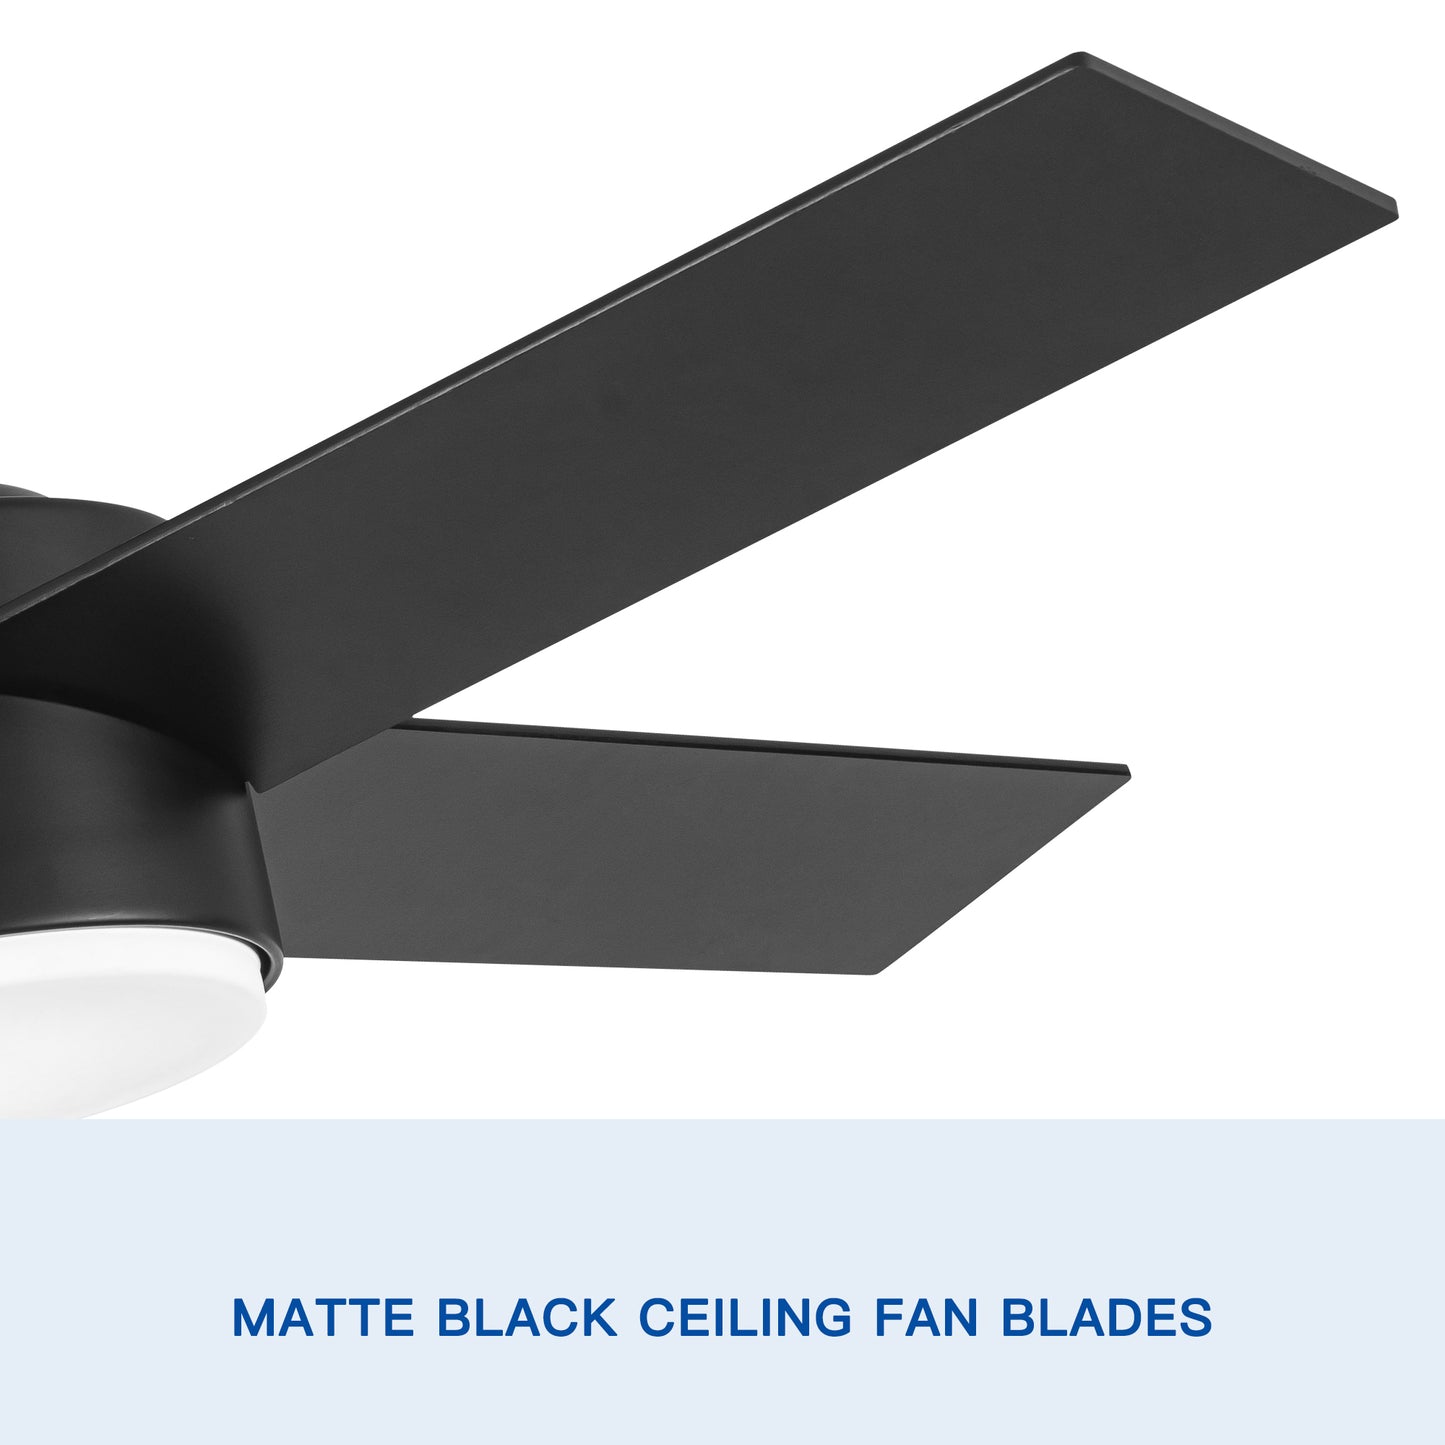 44 Inch Integrated LED Ceiling Fan with Black ABS Blade